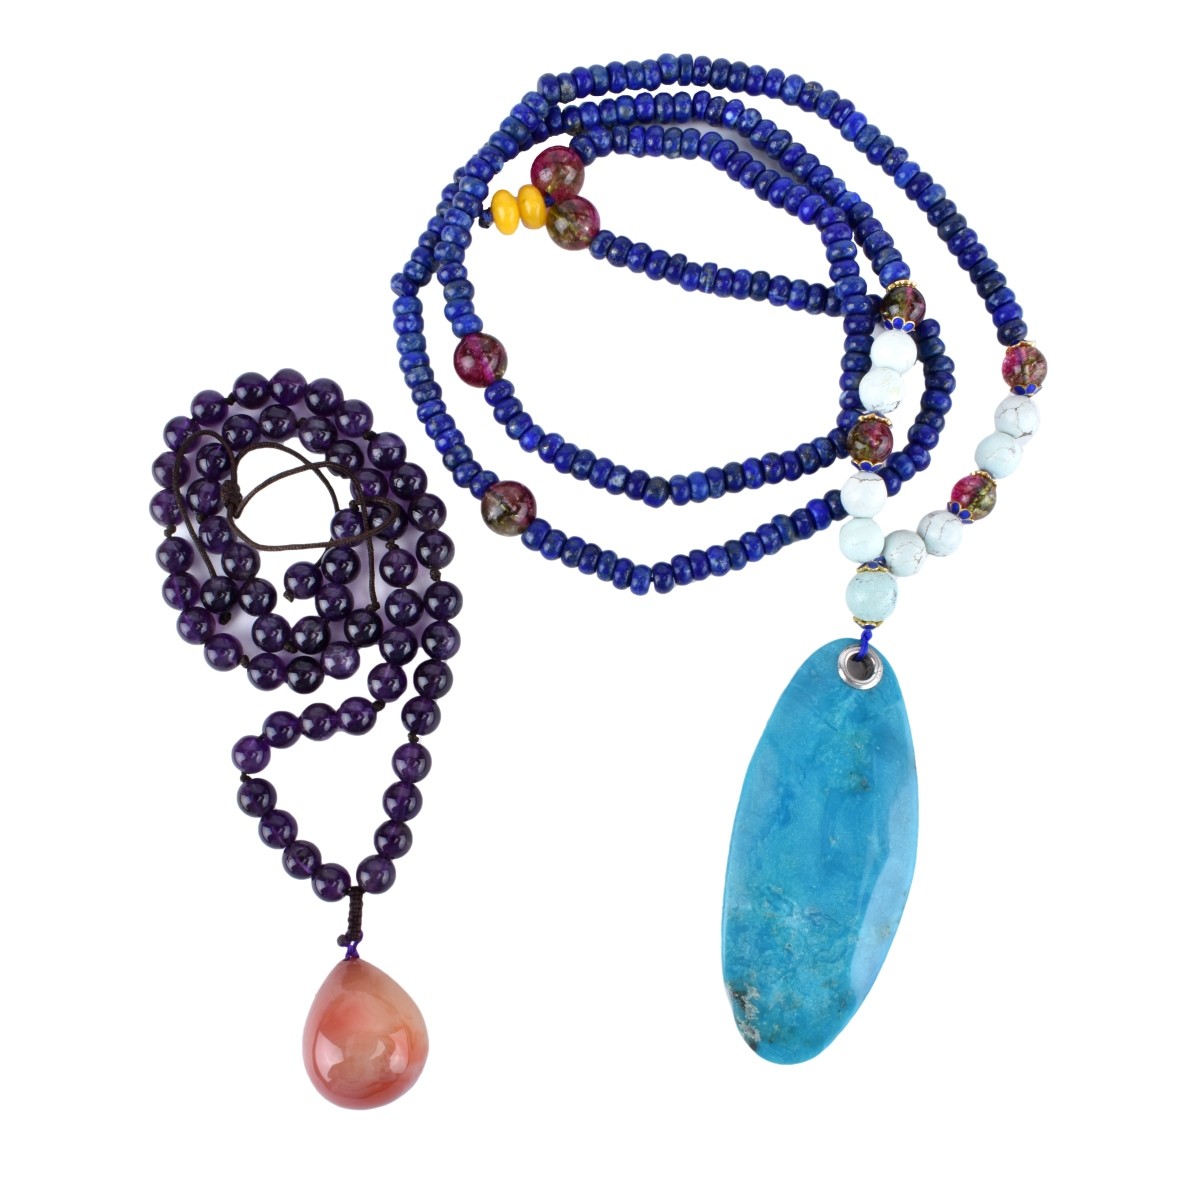 Two Hardstone Beaded Necklaces